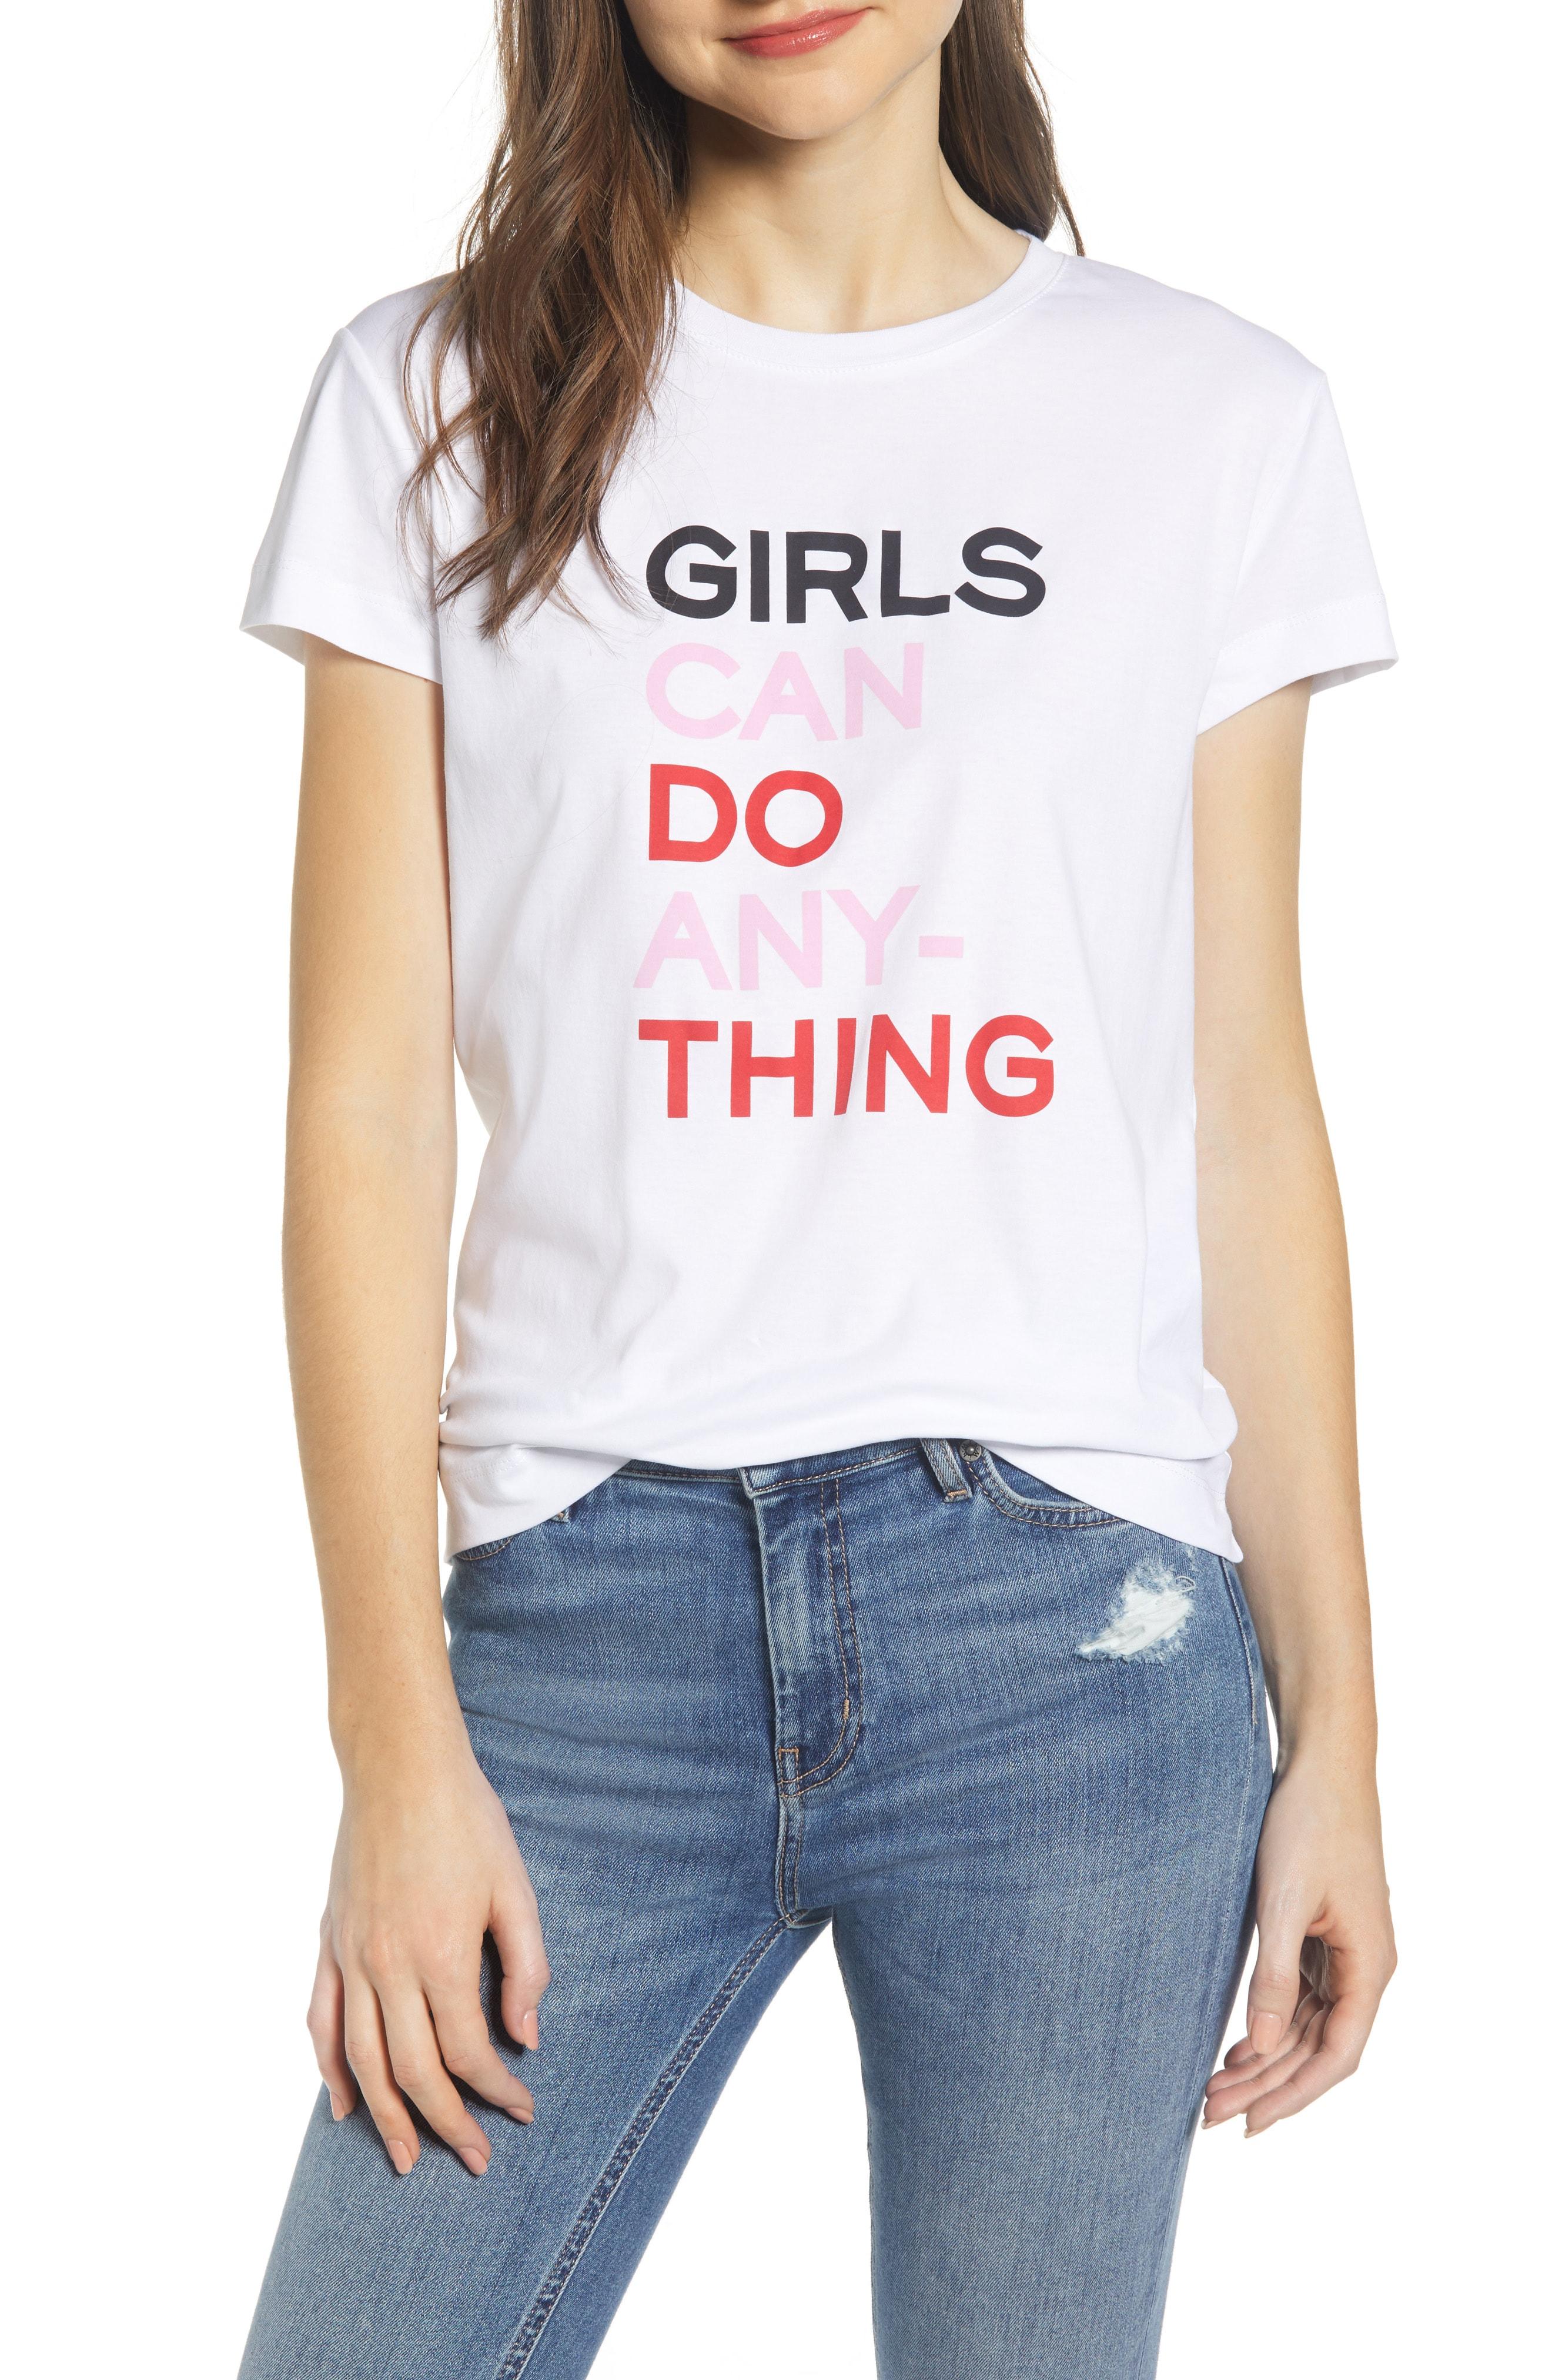 Lyst - Zadig & Voltaire Girls Can Do Anything Cotton Tee in White - Save 9%